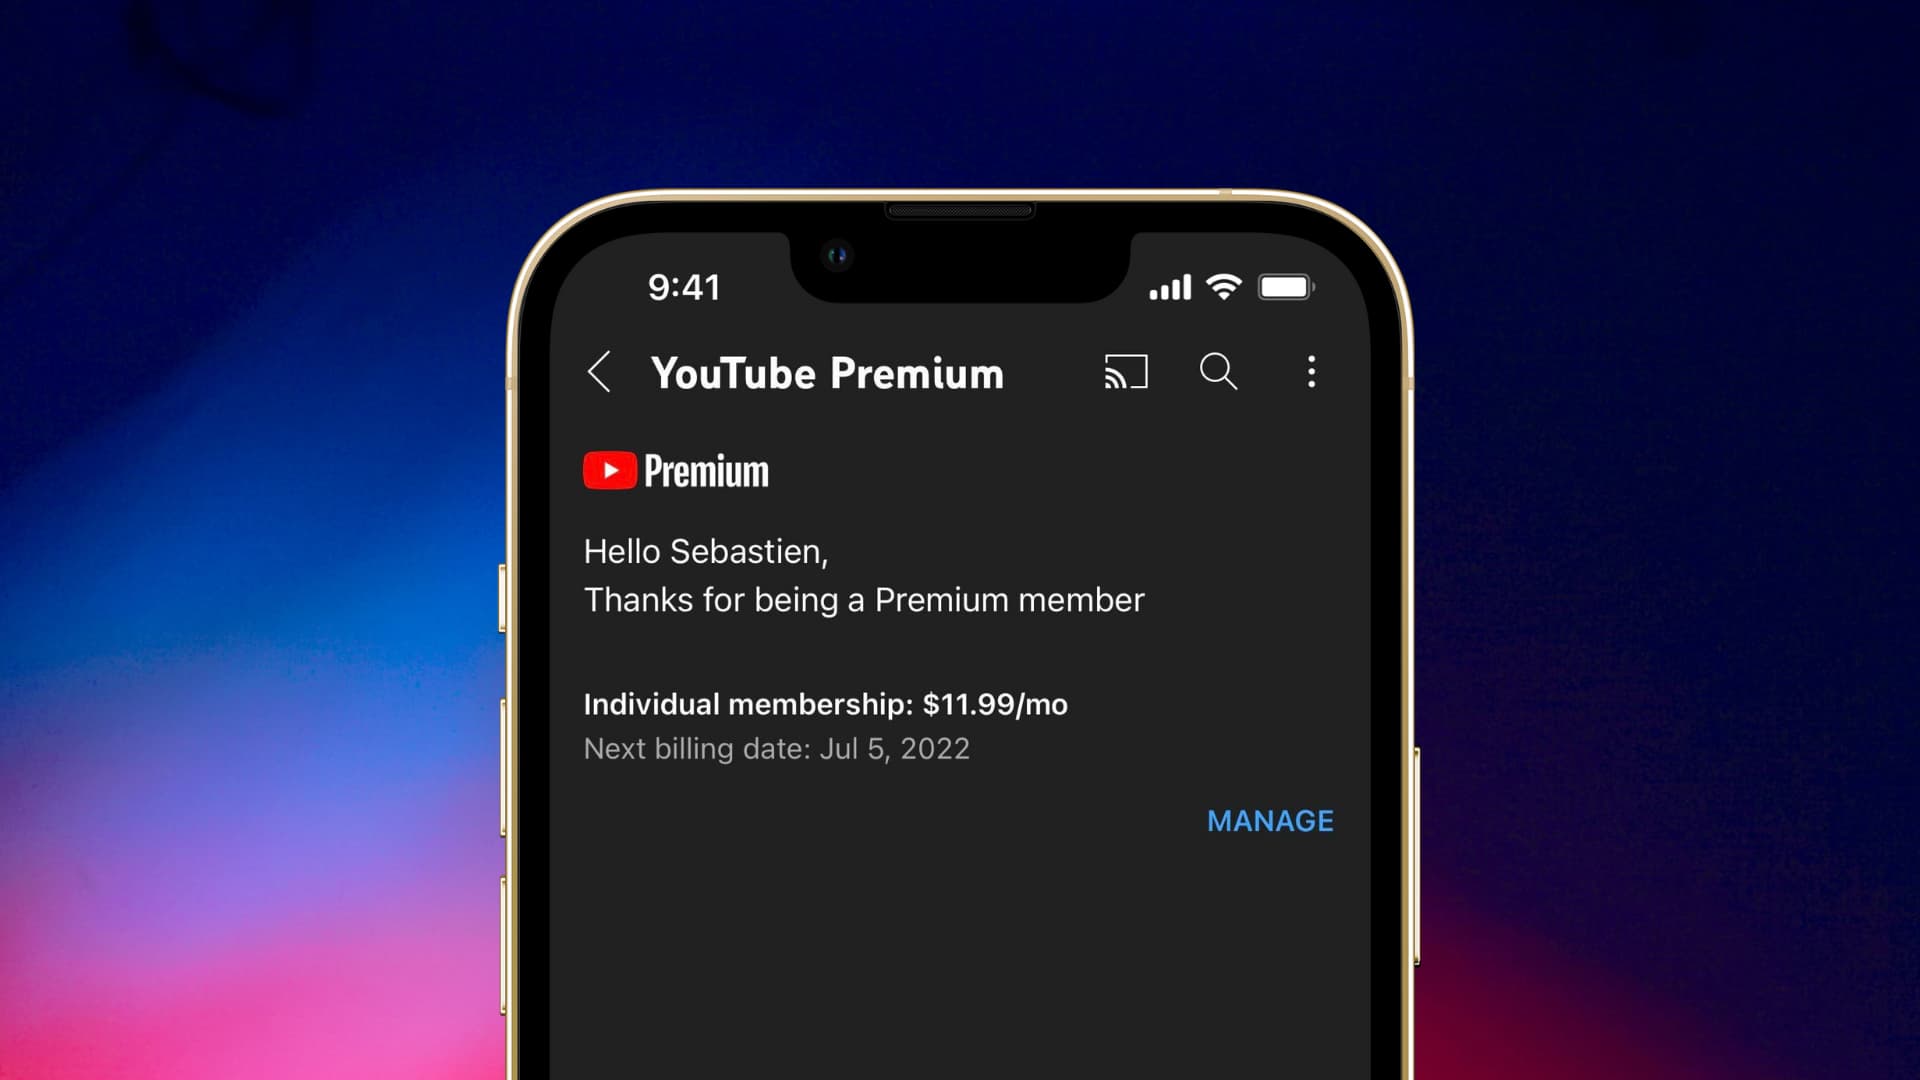 An iPhone showing the manage screen for YouTube Premium membership